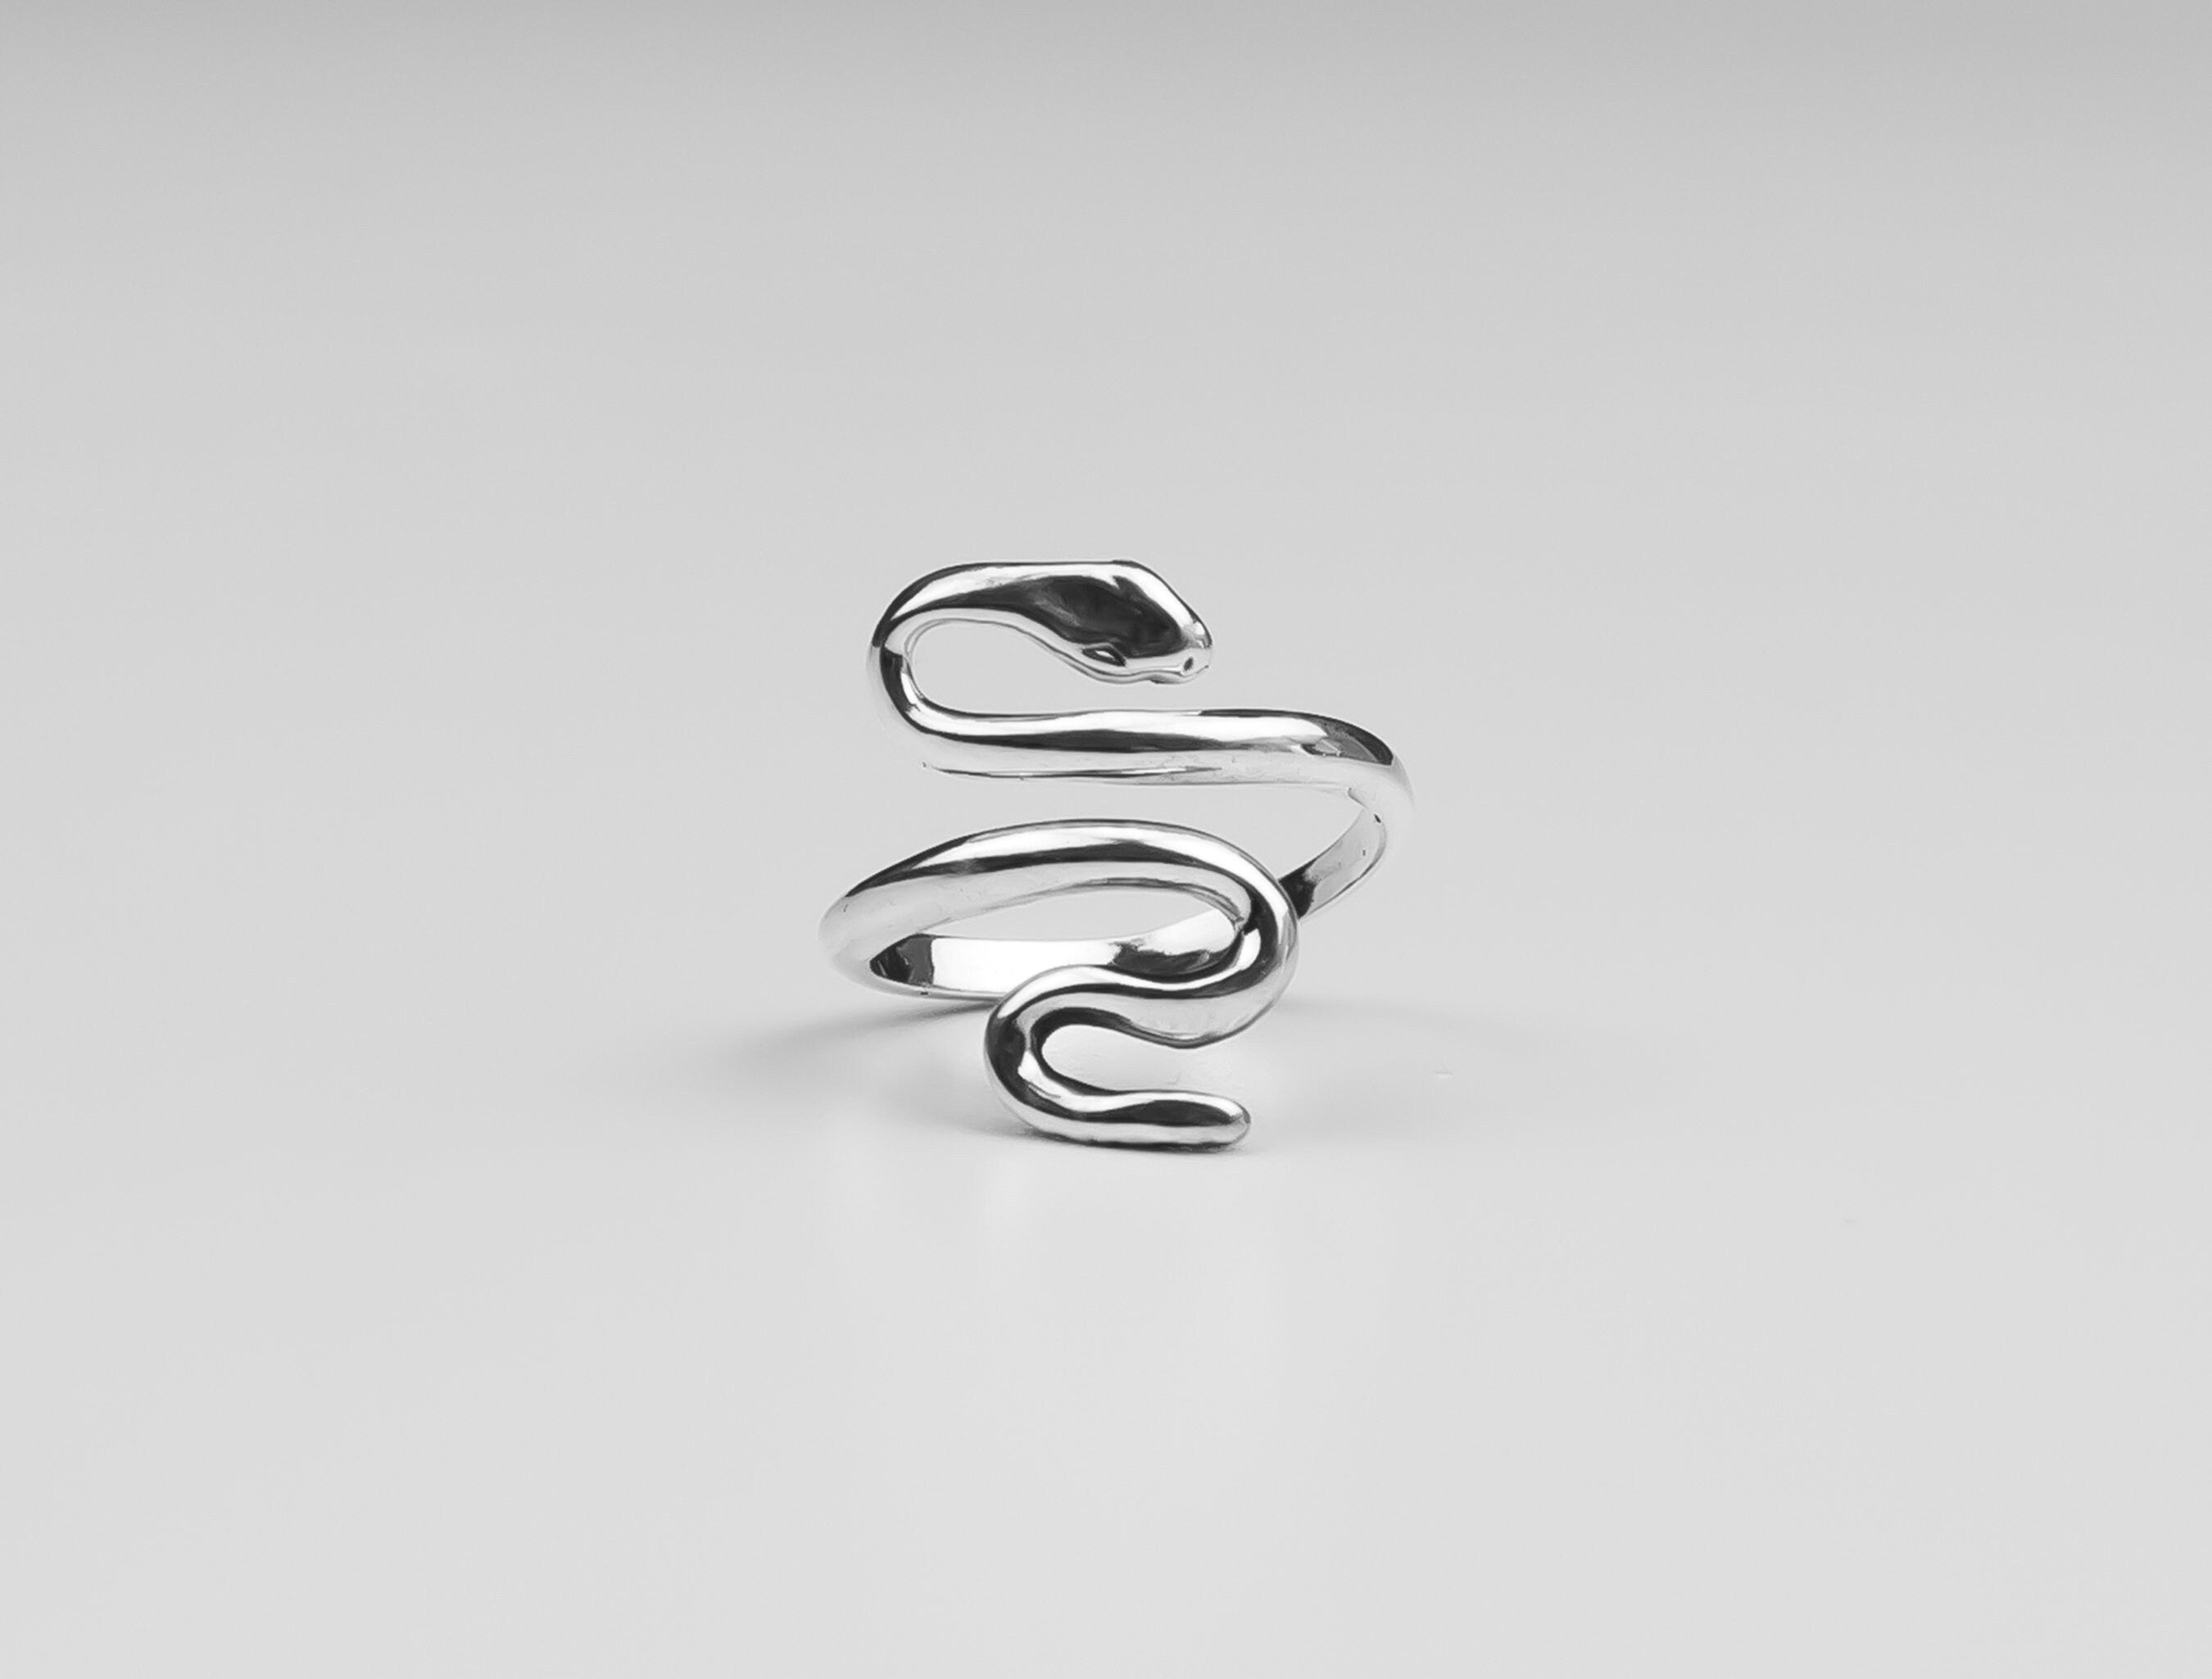 Silver 925 Snake Ring, Boho Silver Ring, Adjustable Silver Ring, Best Gift for Women, Sterling Silver Ring, Silver Animal Ring